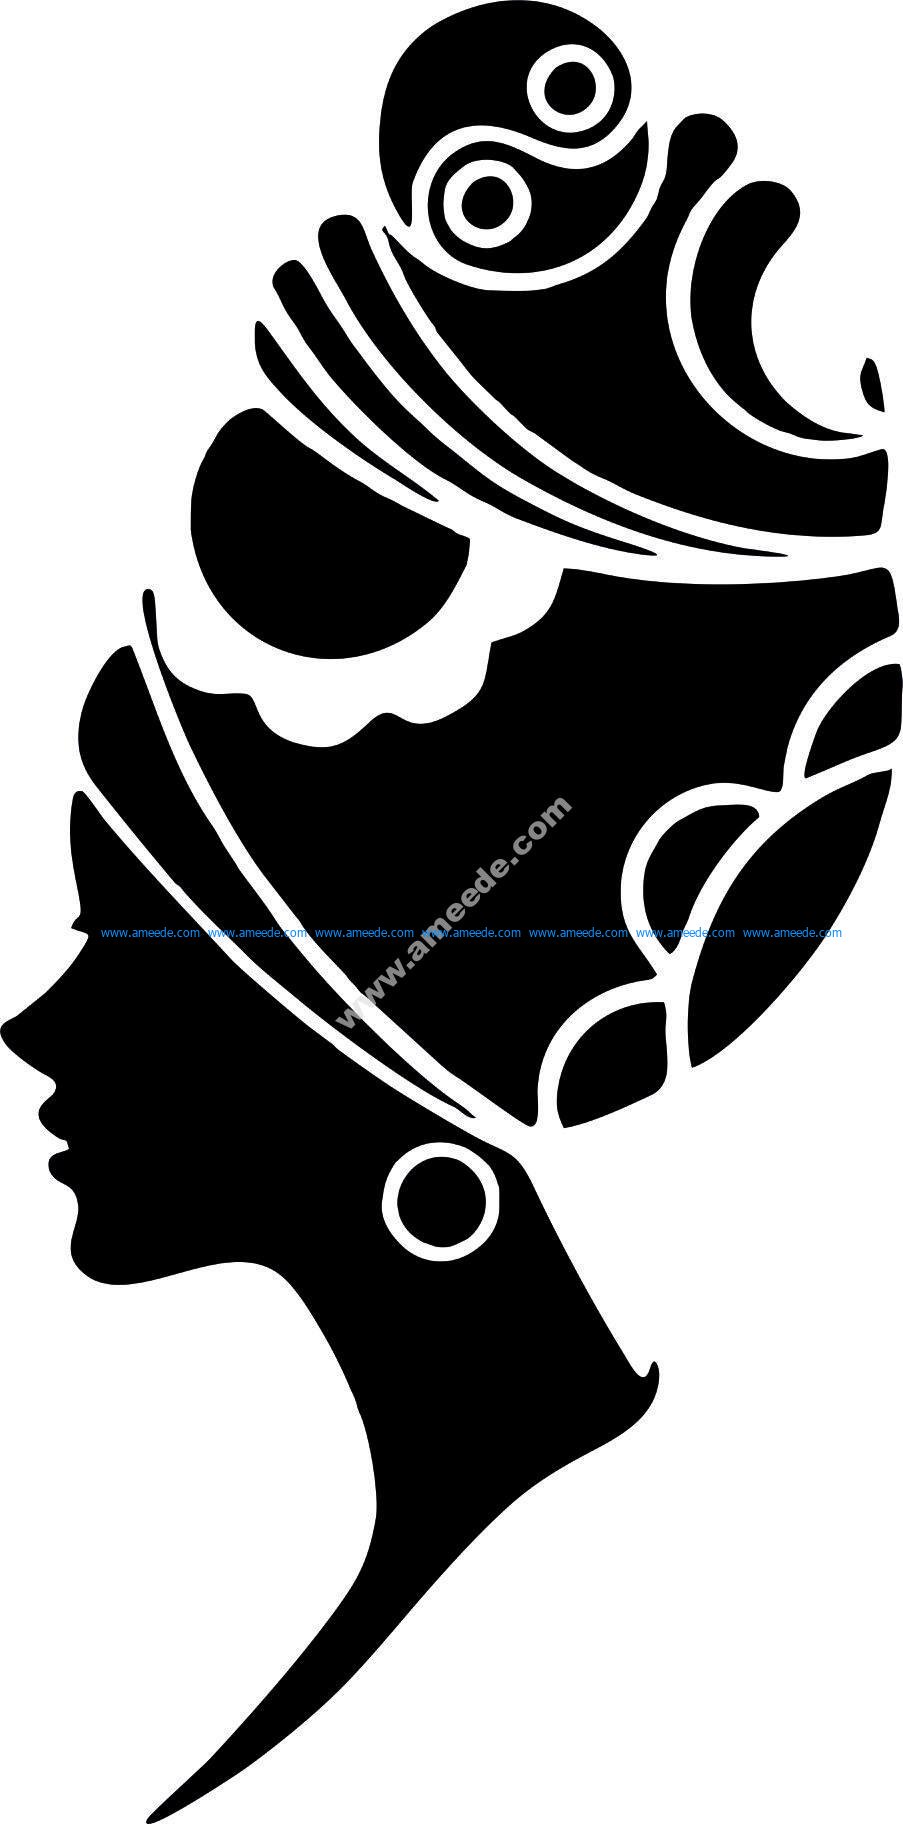 Woman Face Silhouette Vector Art jpg Image – Download Vector